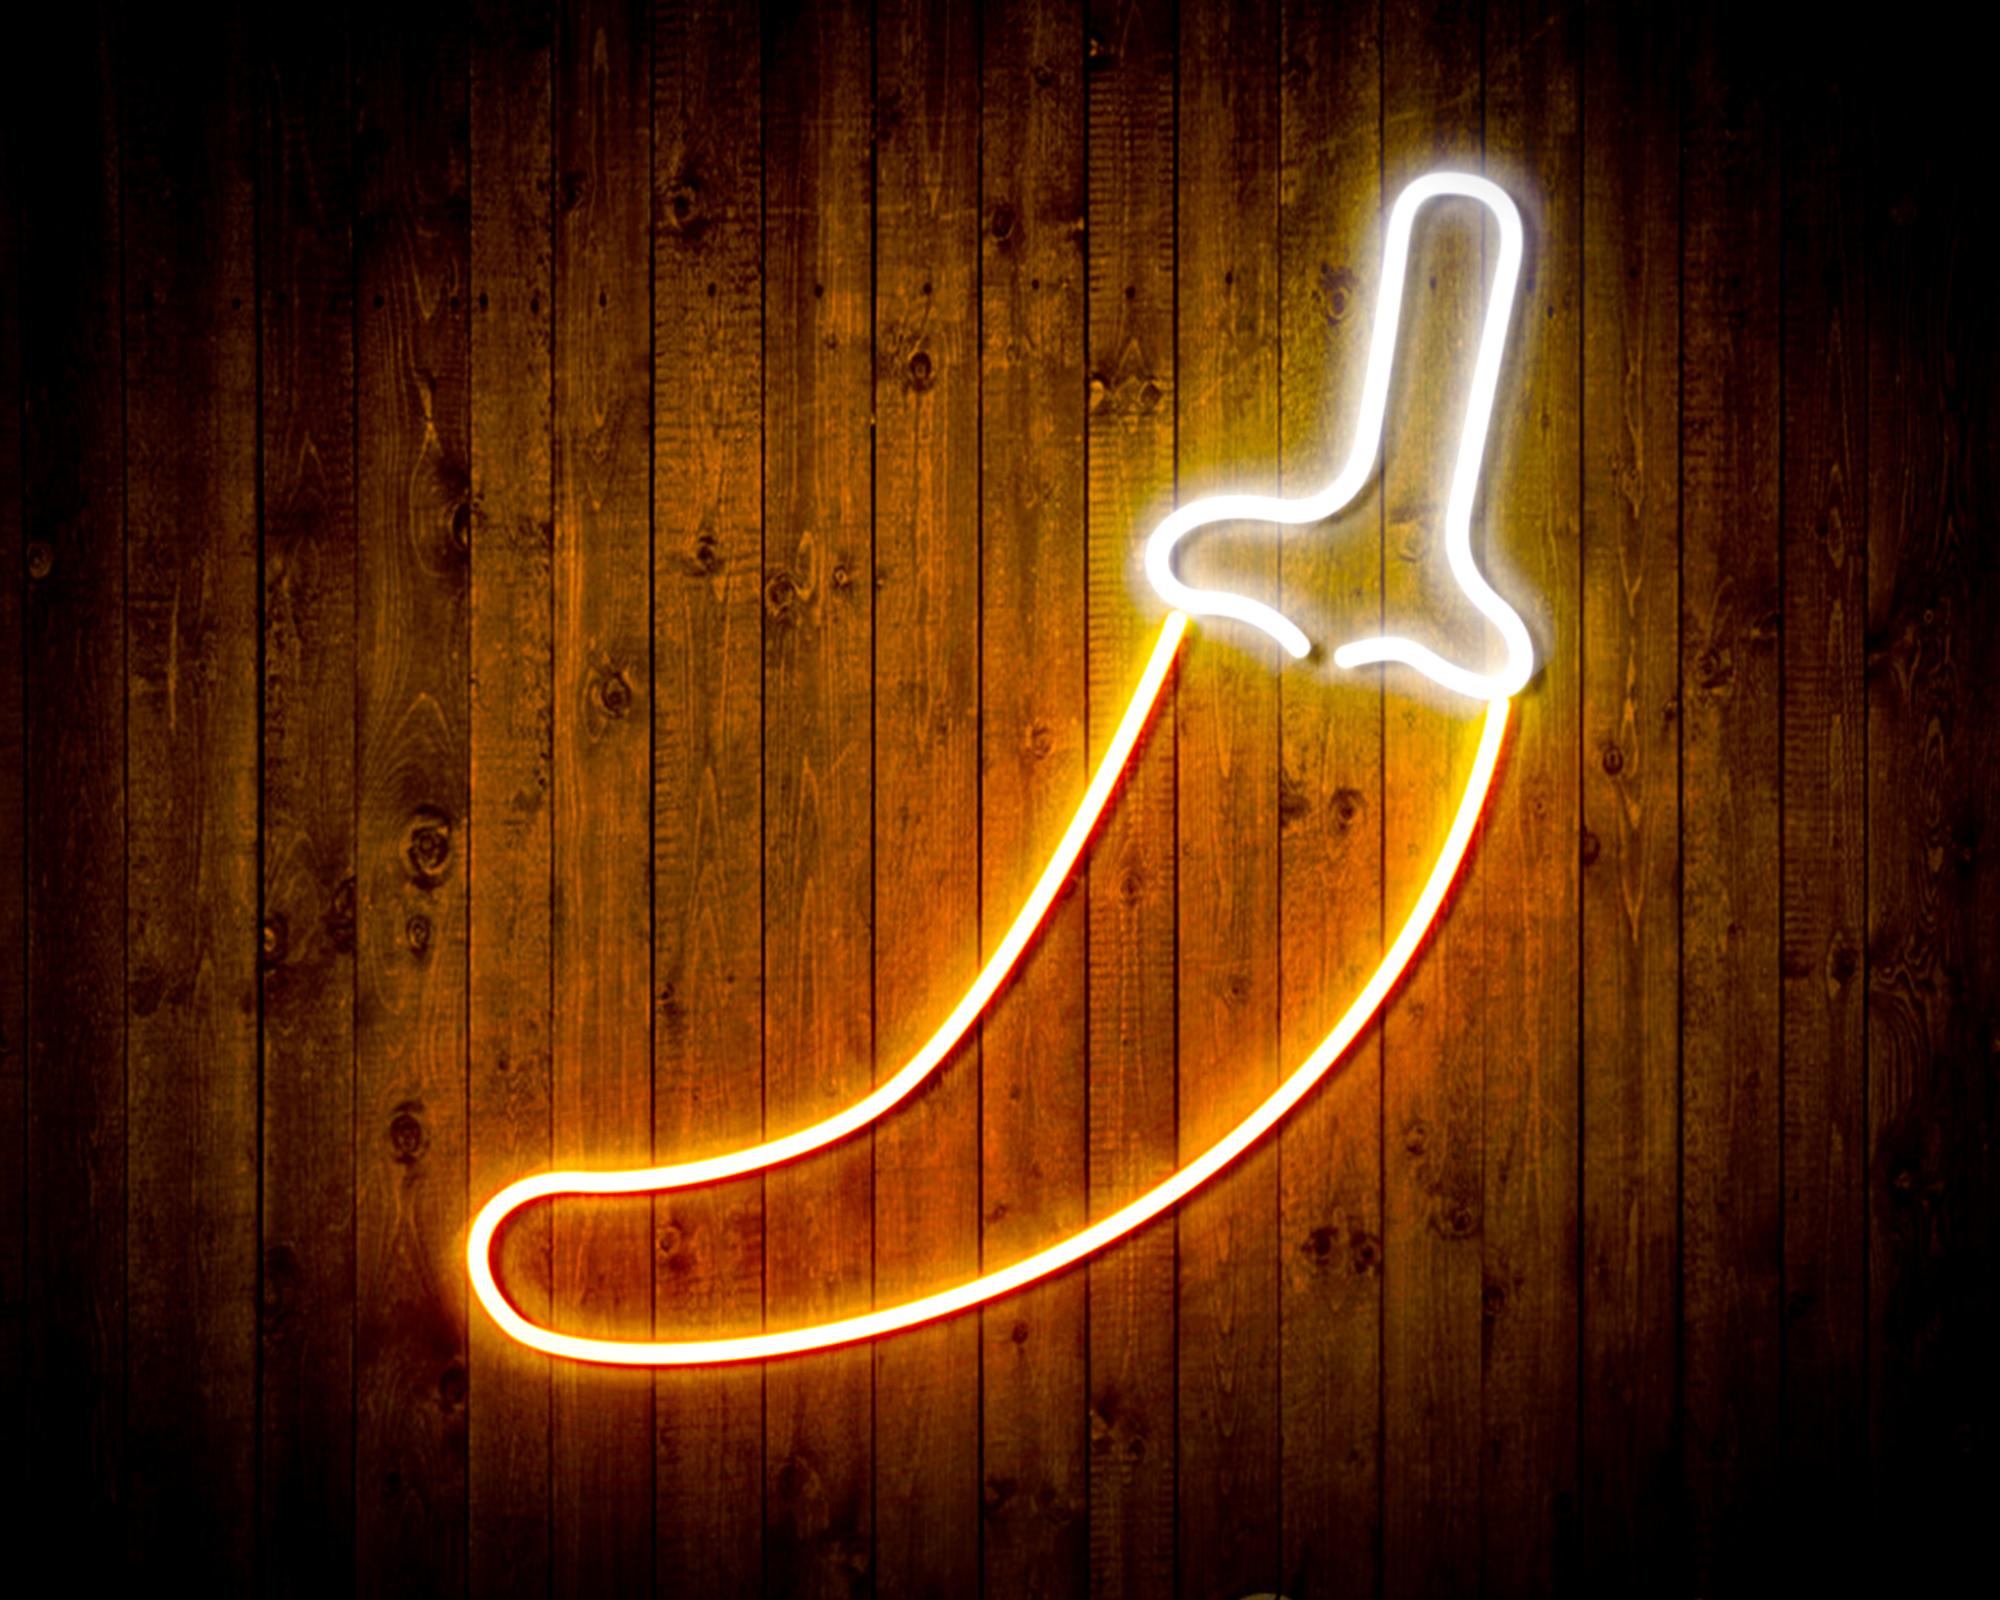 Red Pepper LED Neon Sign Wall Light